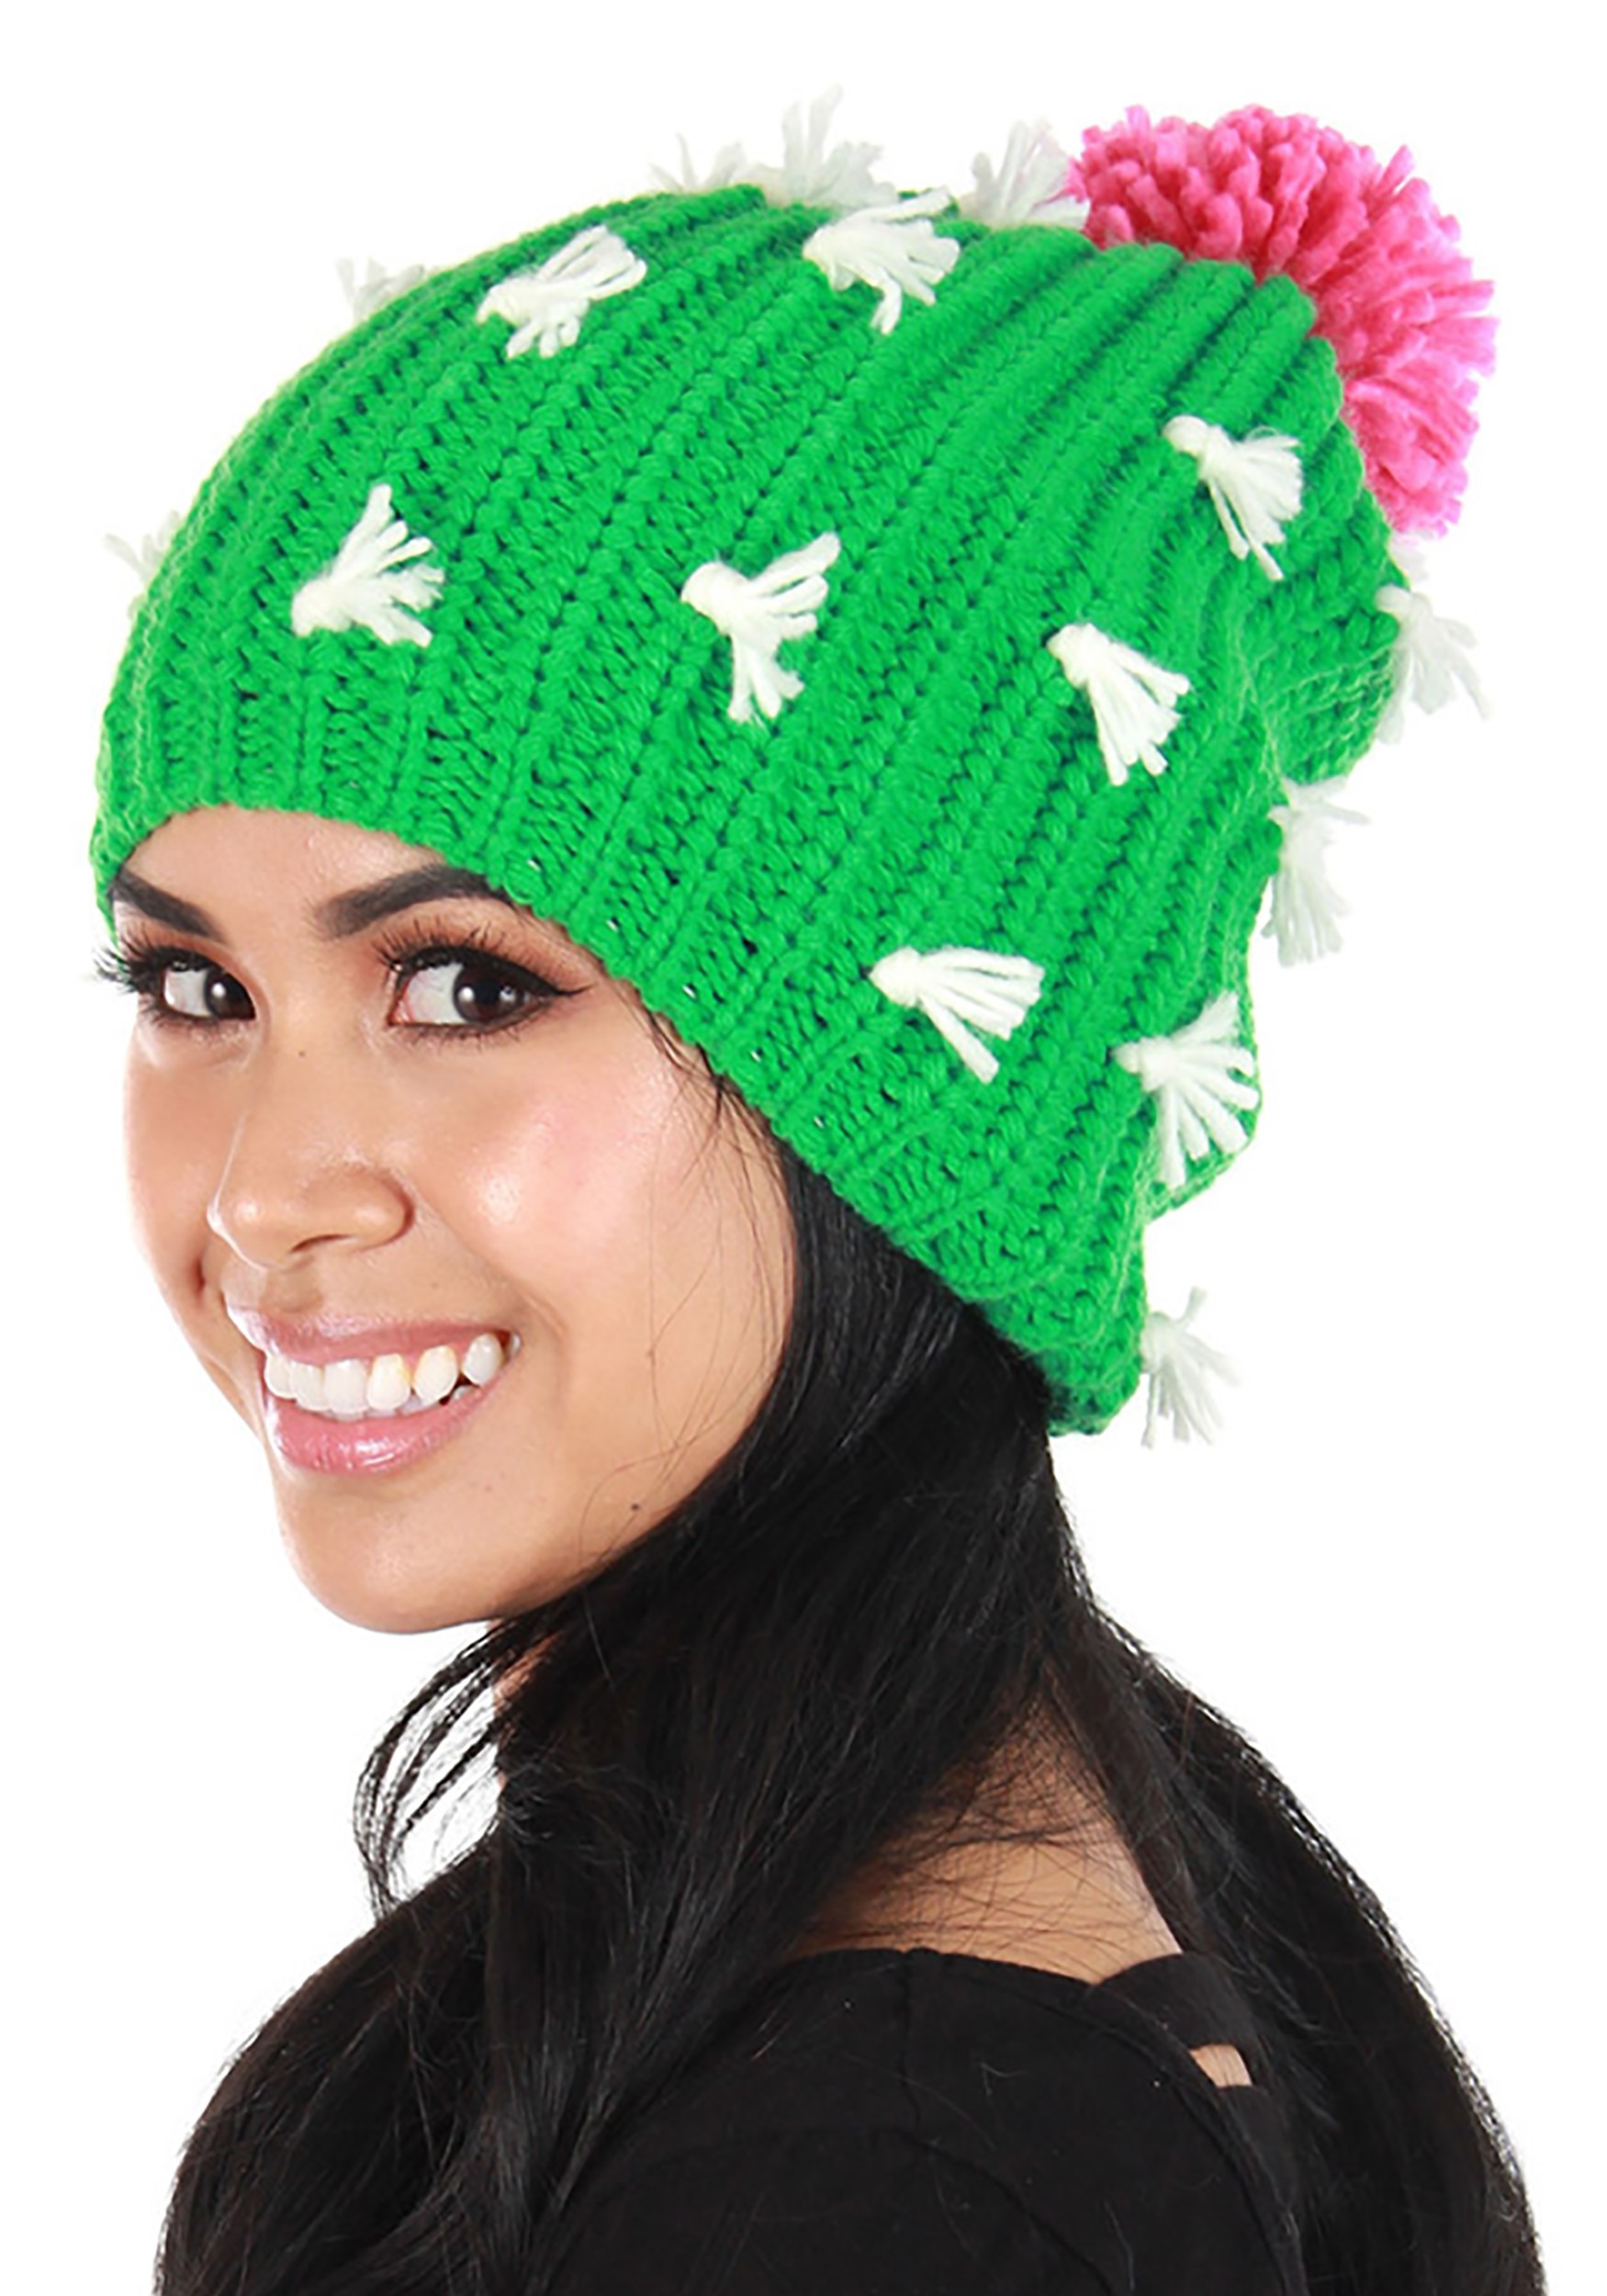 Adult Knit Cactus Slouch Beanie